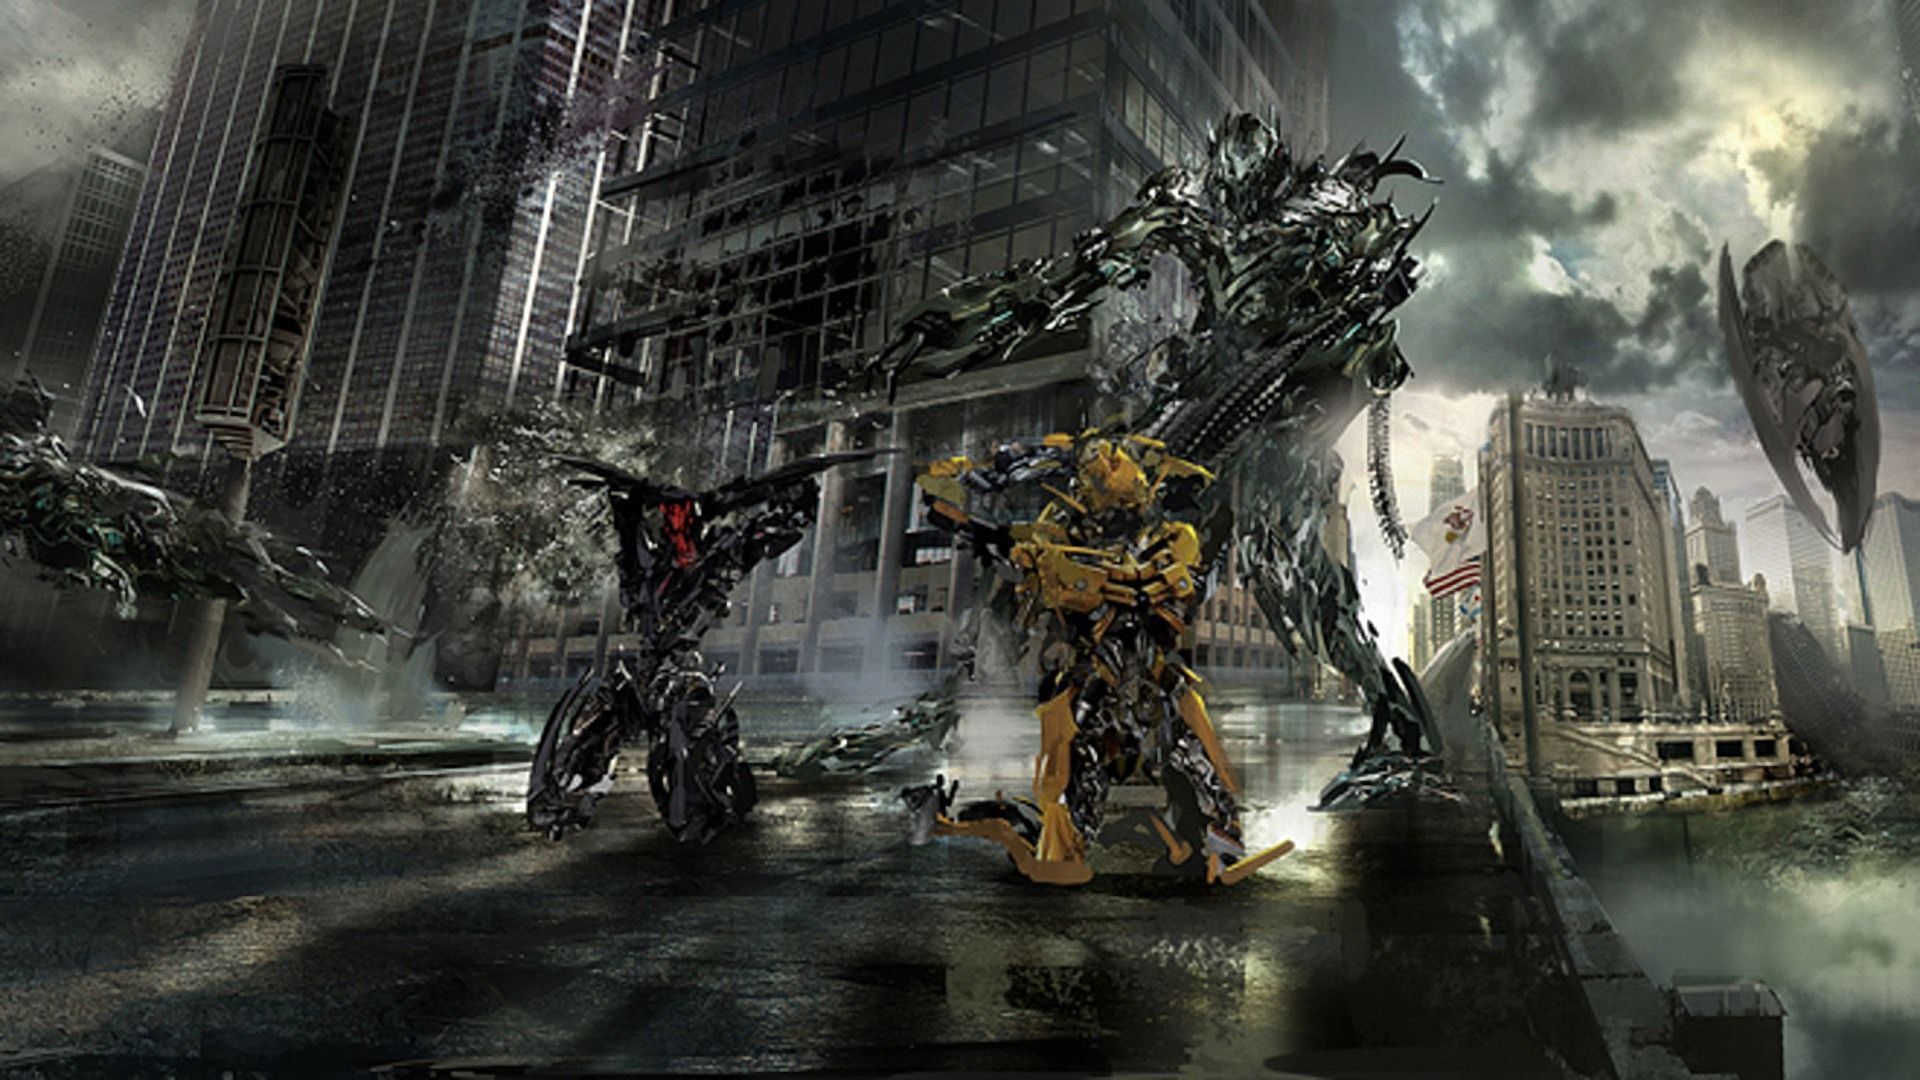 Transformers 1920x1080 Wallpapers, 1920x1080 Wallpapers & Pictures ...